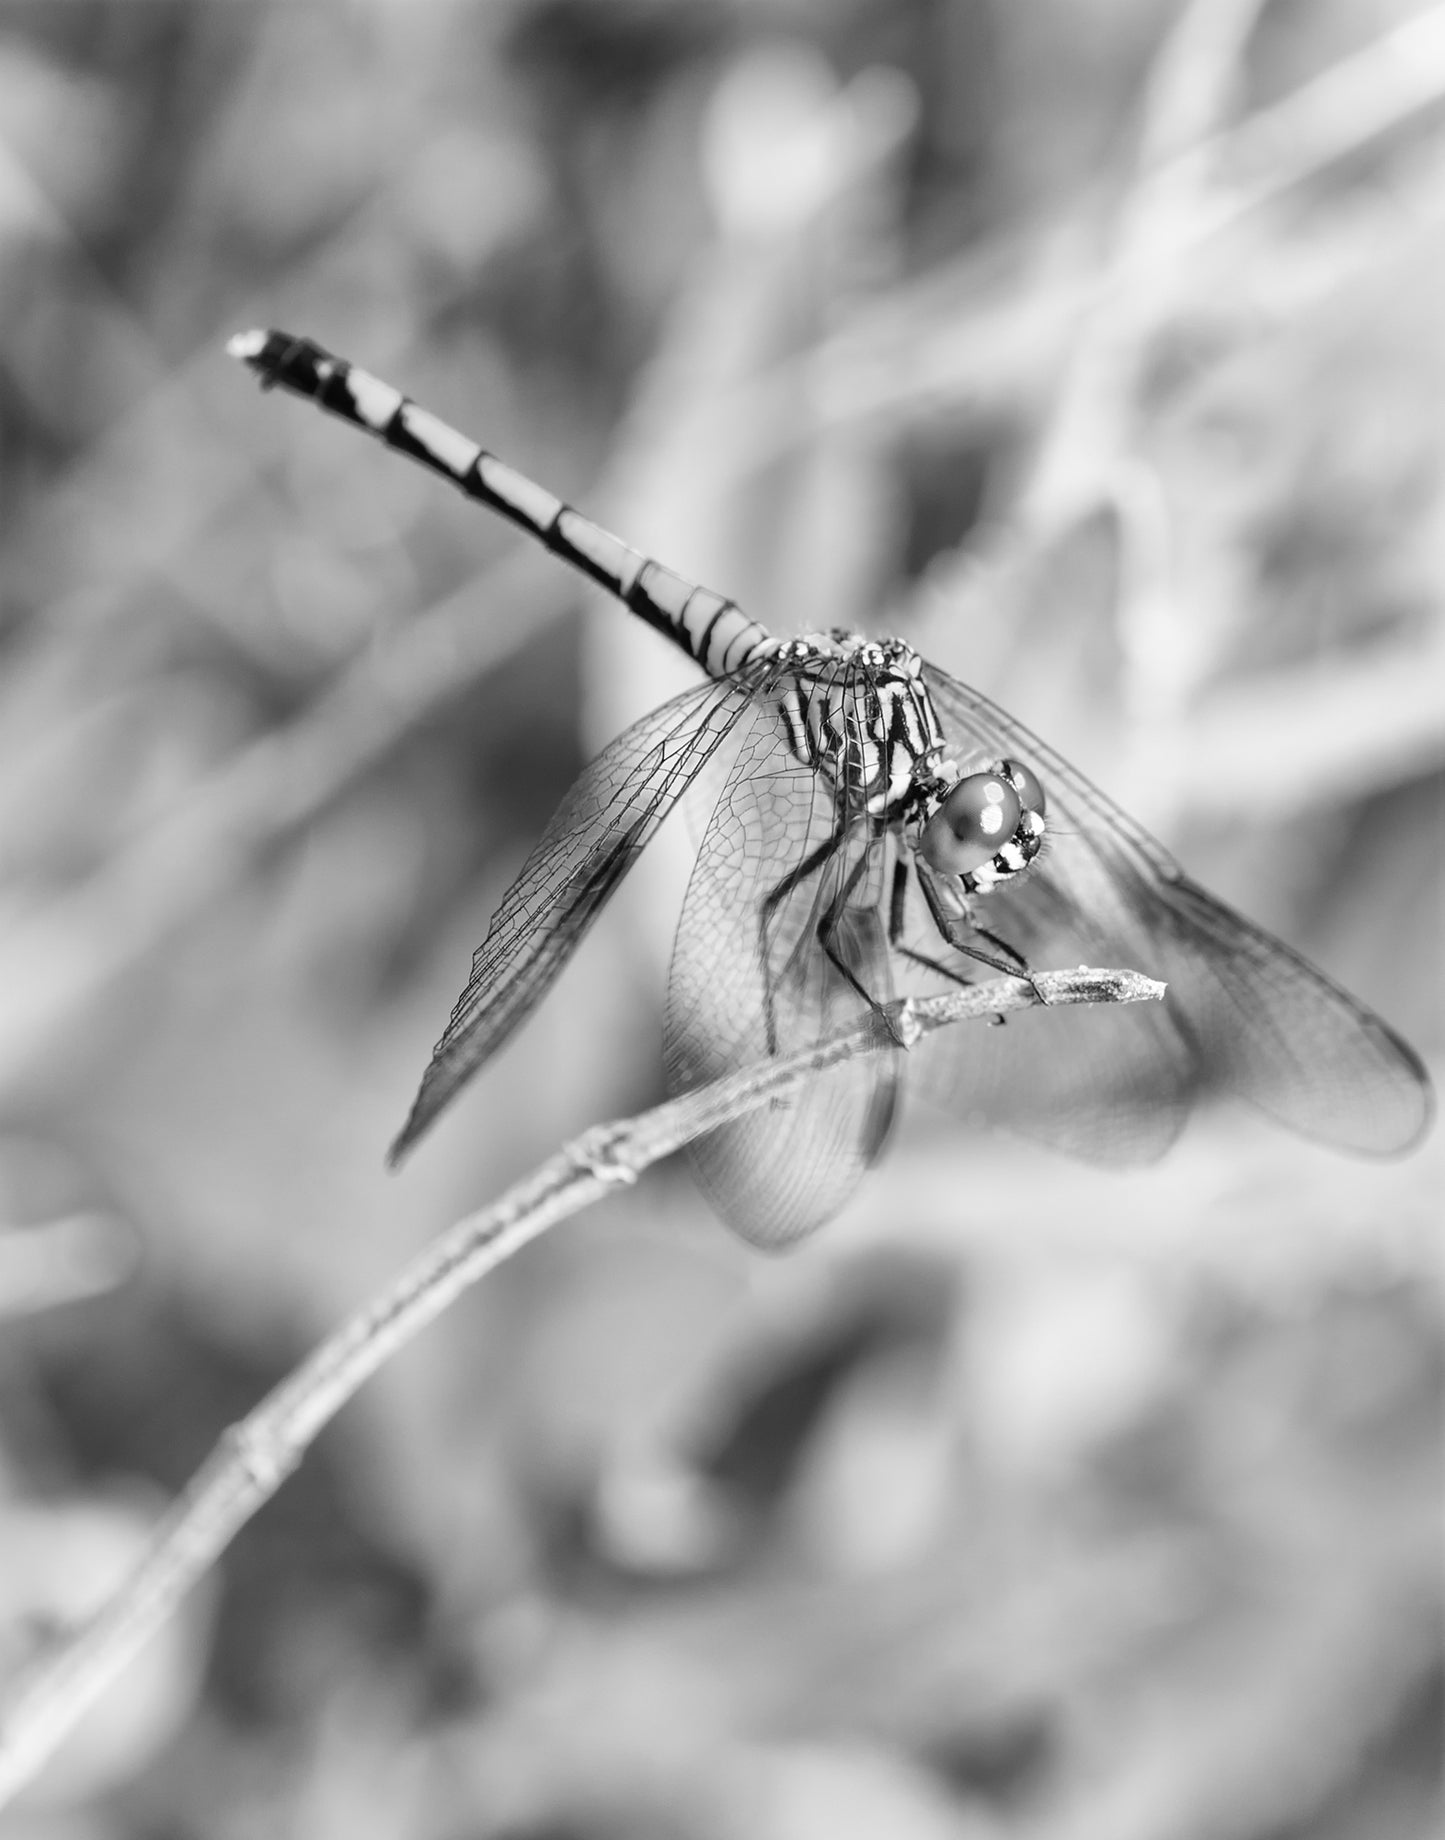 Dragonfly in Black and White Animal / Wildlife Photograph Fine Art Canvas Wall Art Prints